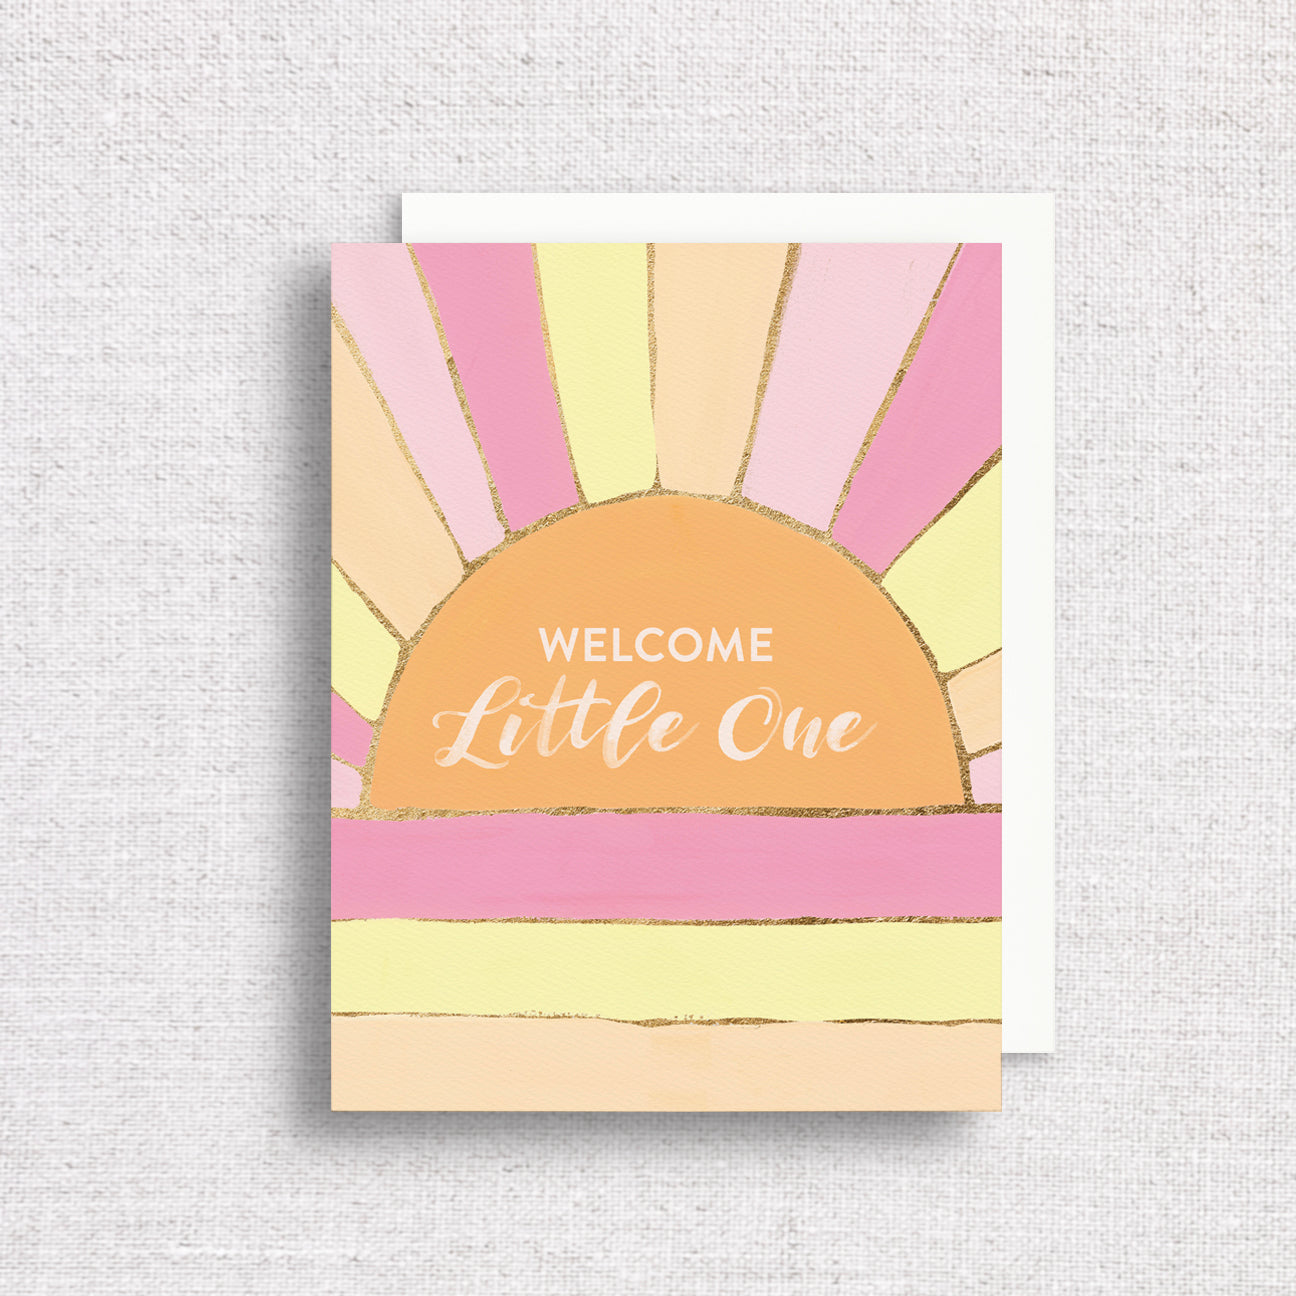 welcome little one retro sun greeting card by Gert & Co